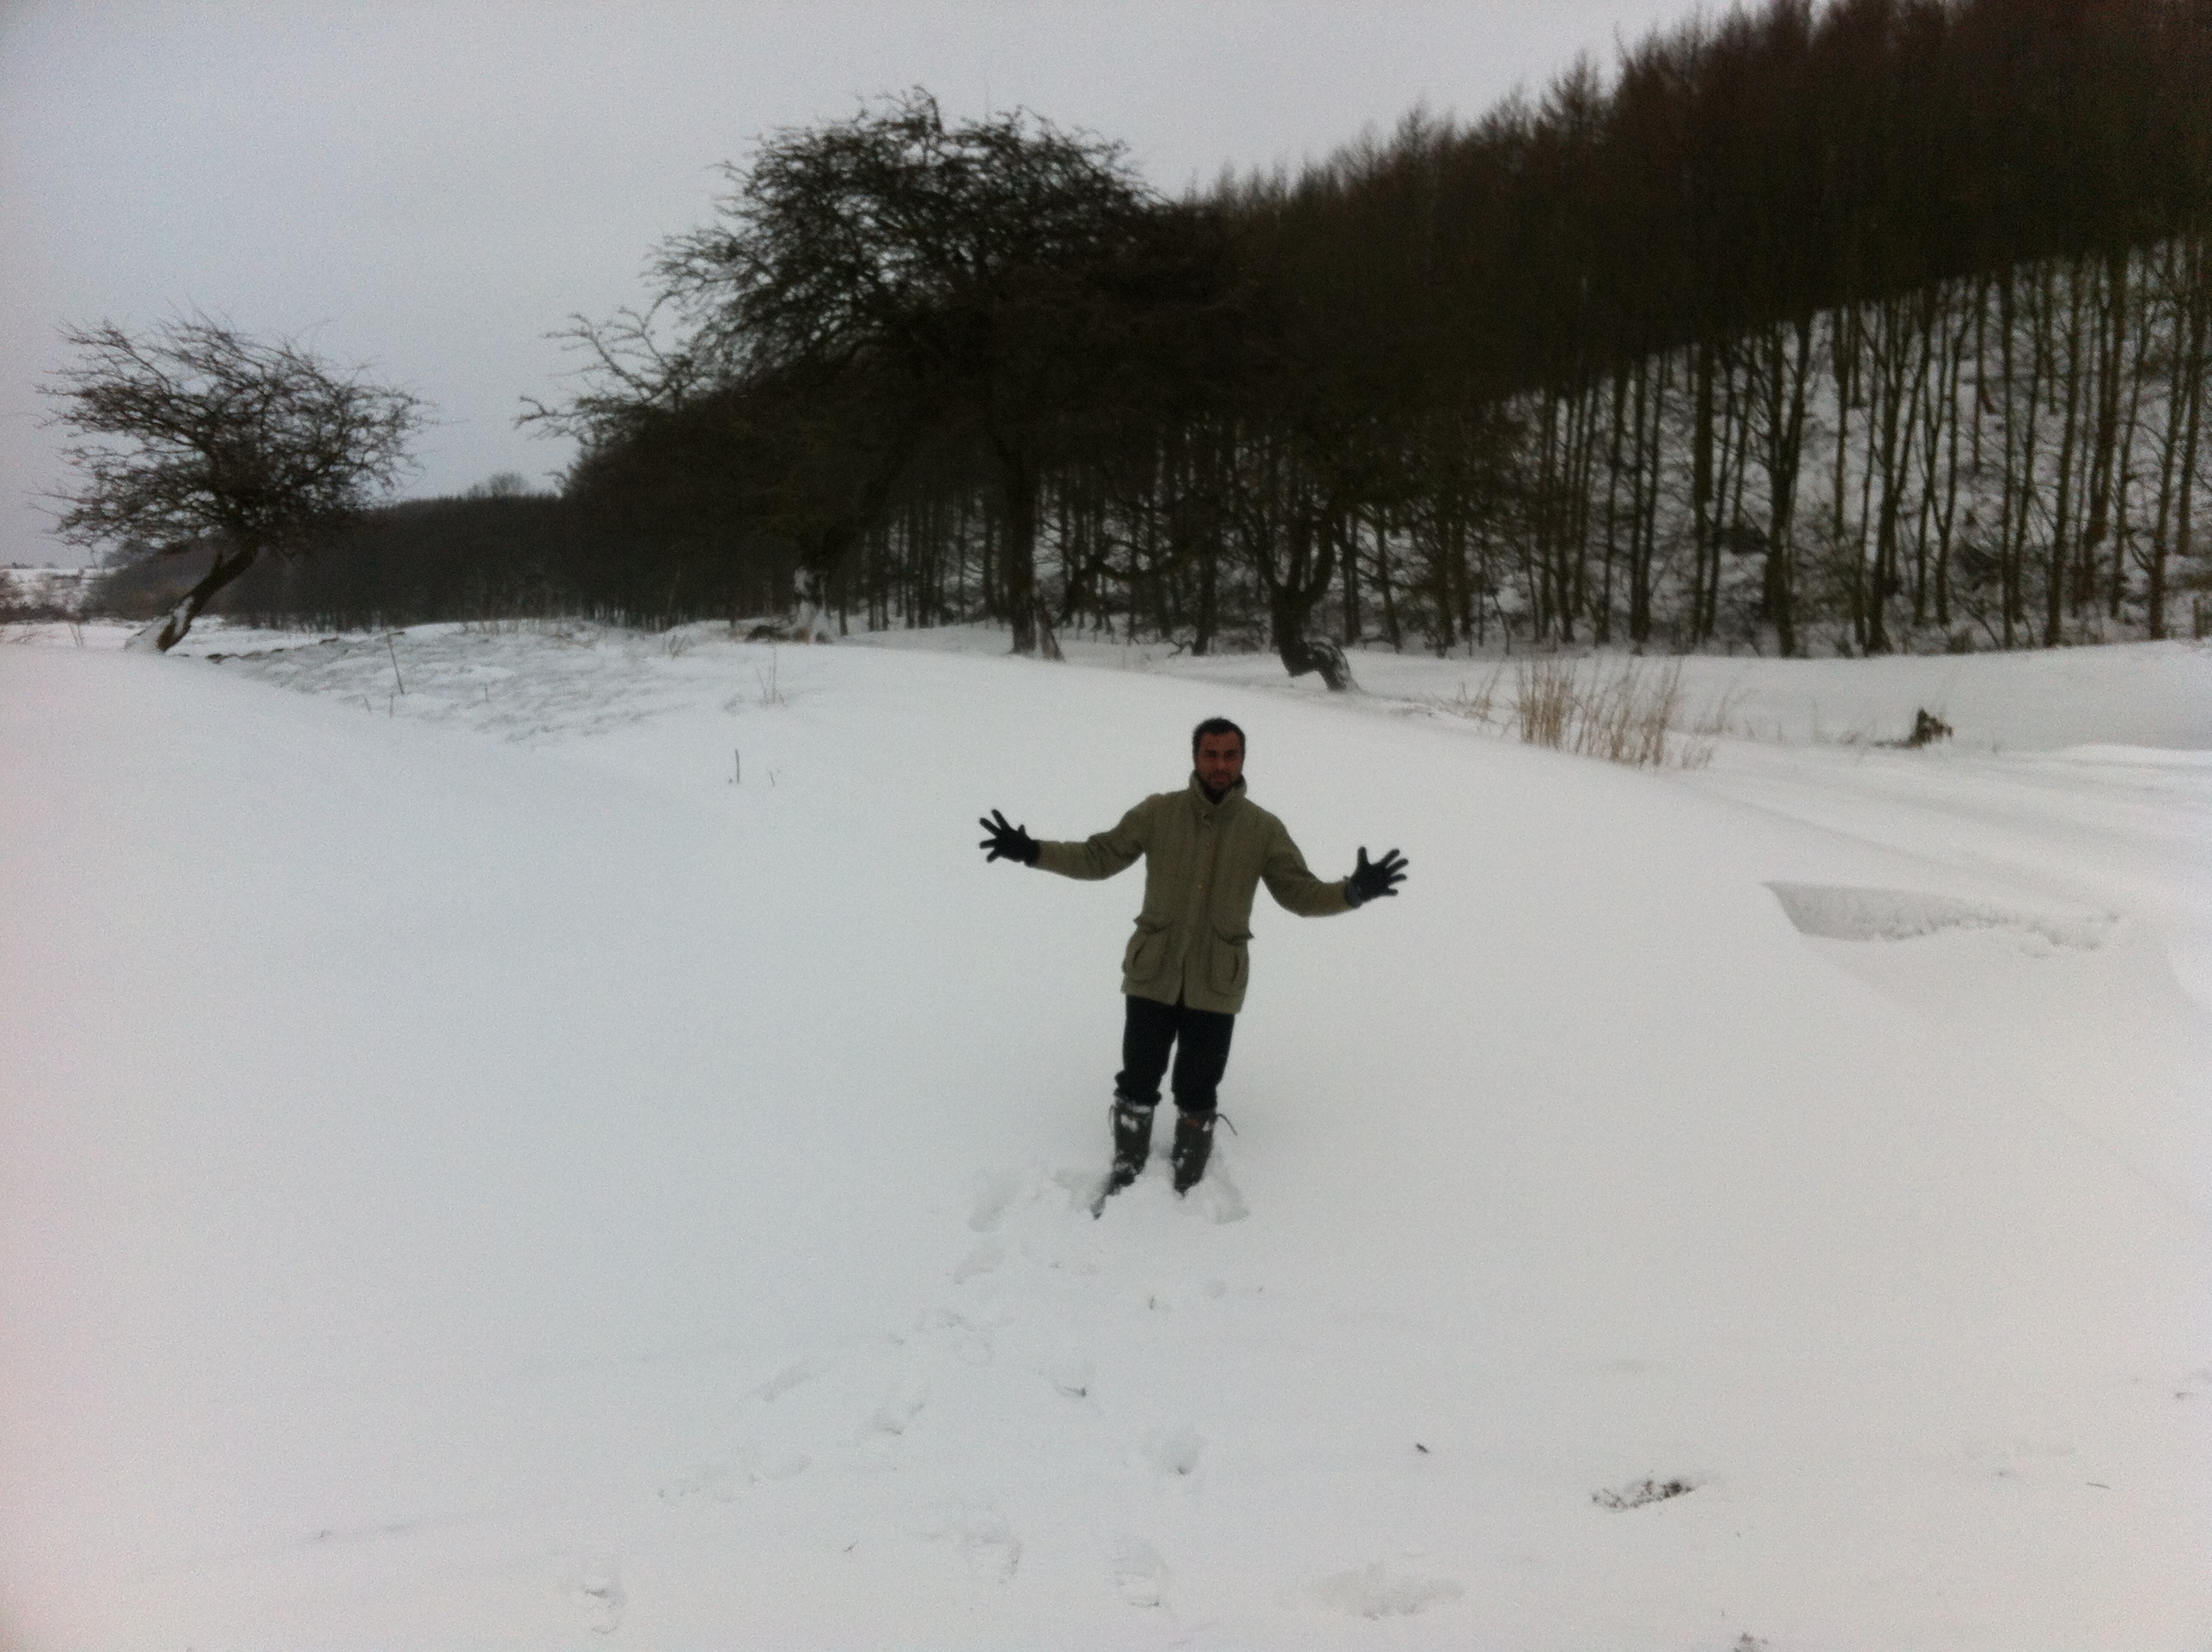 Enjoying the snow in Yorkshire with snow drifts and all. A tutoring trip with snow adventure!